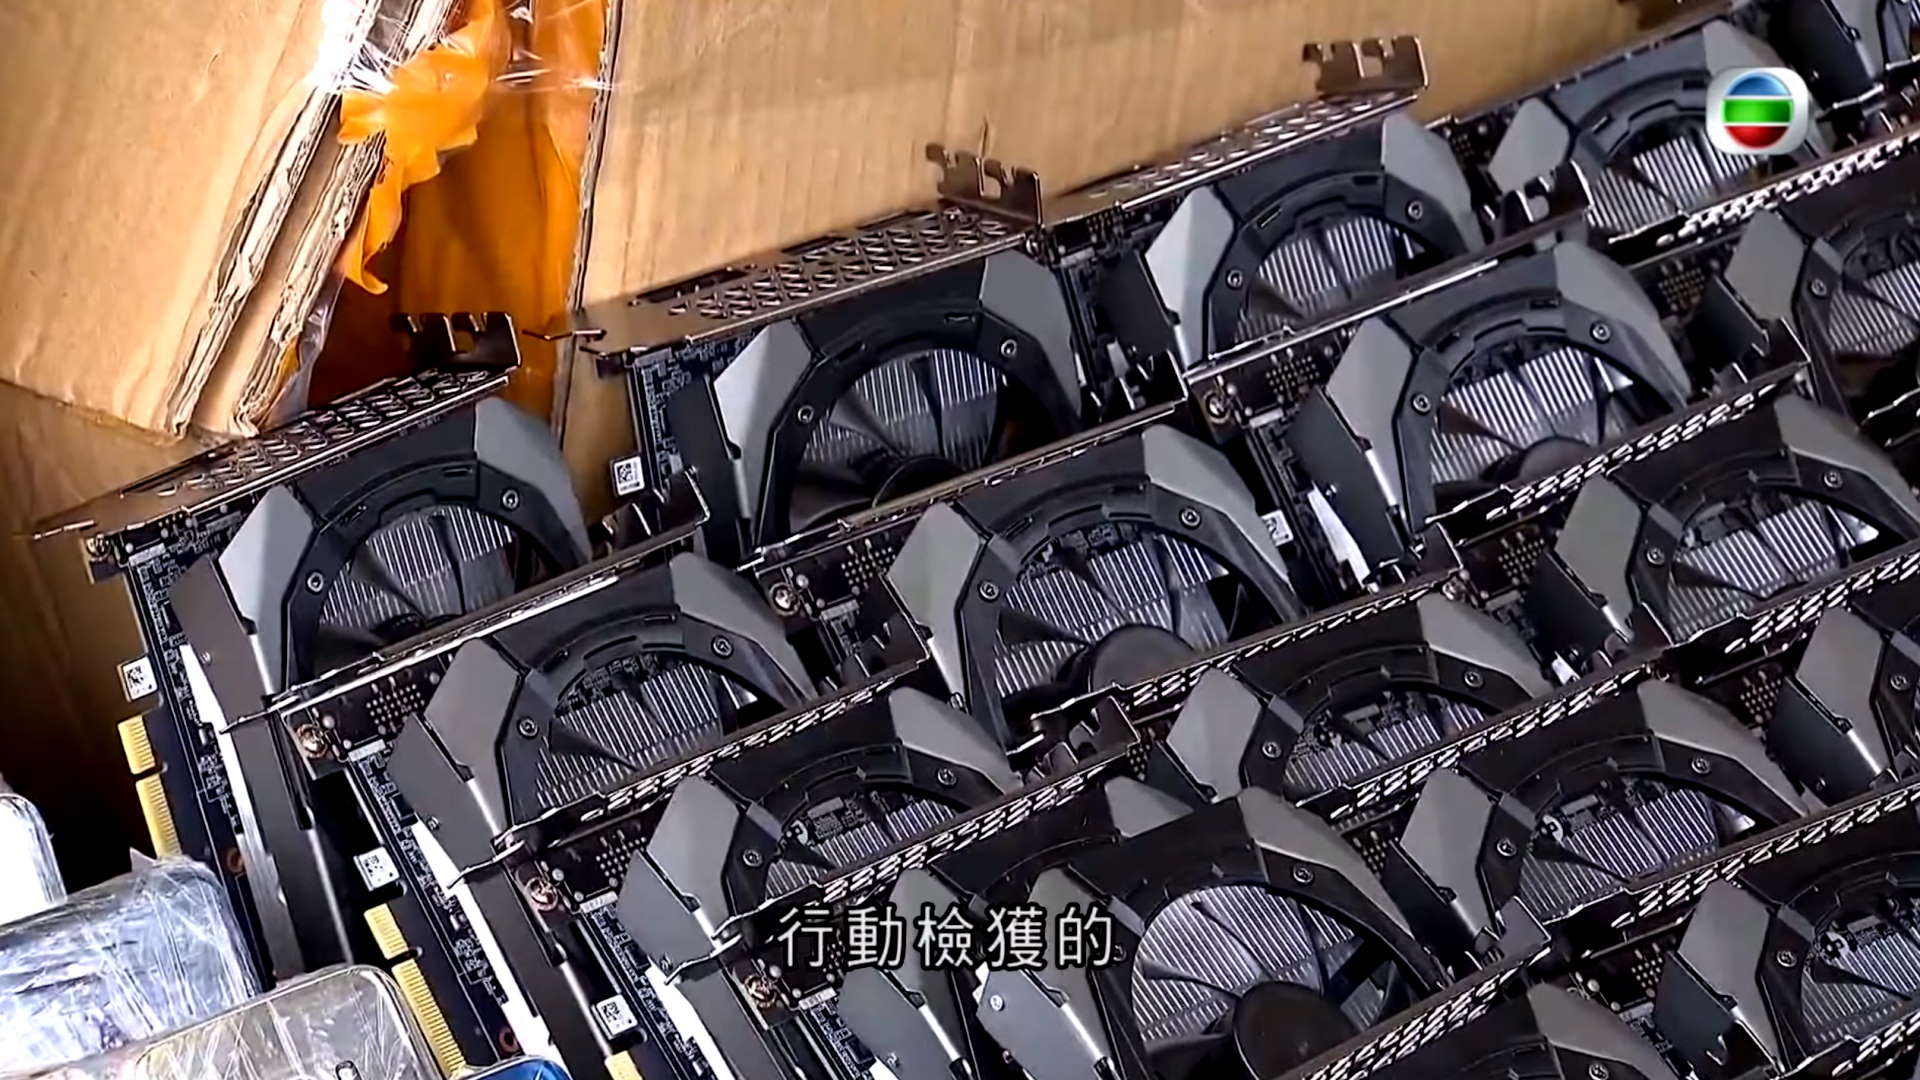 Graphics Card Maker, XFX, Busted in China: Website Taken Down As Customs  Authorities Seize Over 5000 Illegal Cards Worth Over 3 Million USD